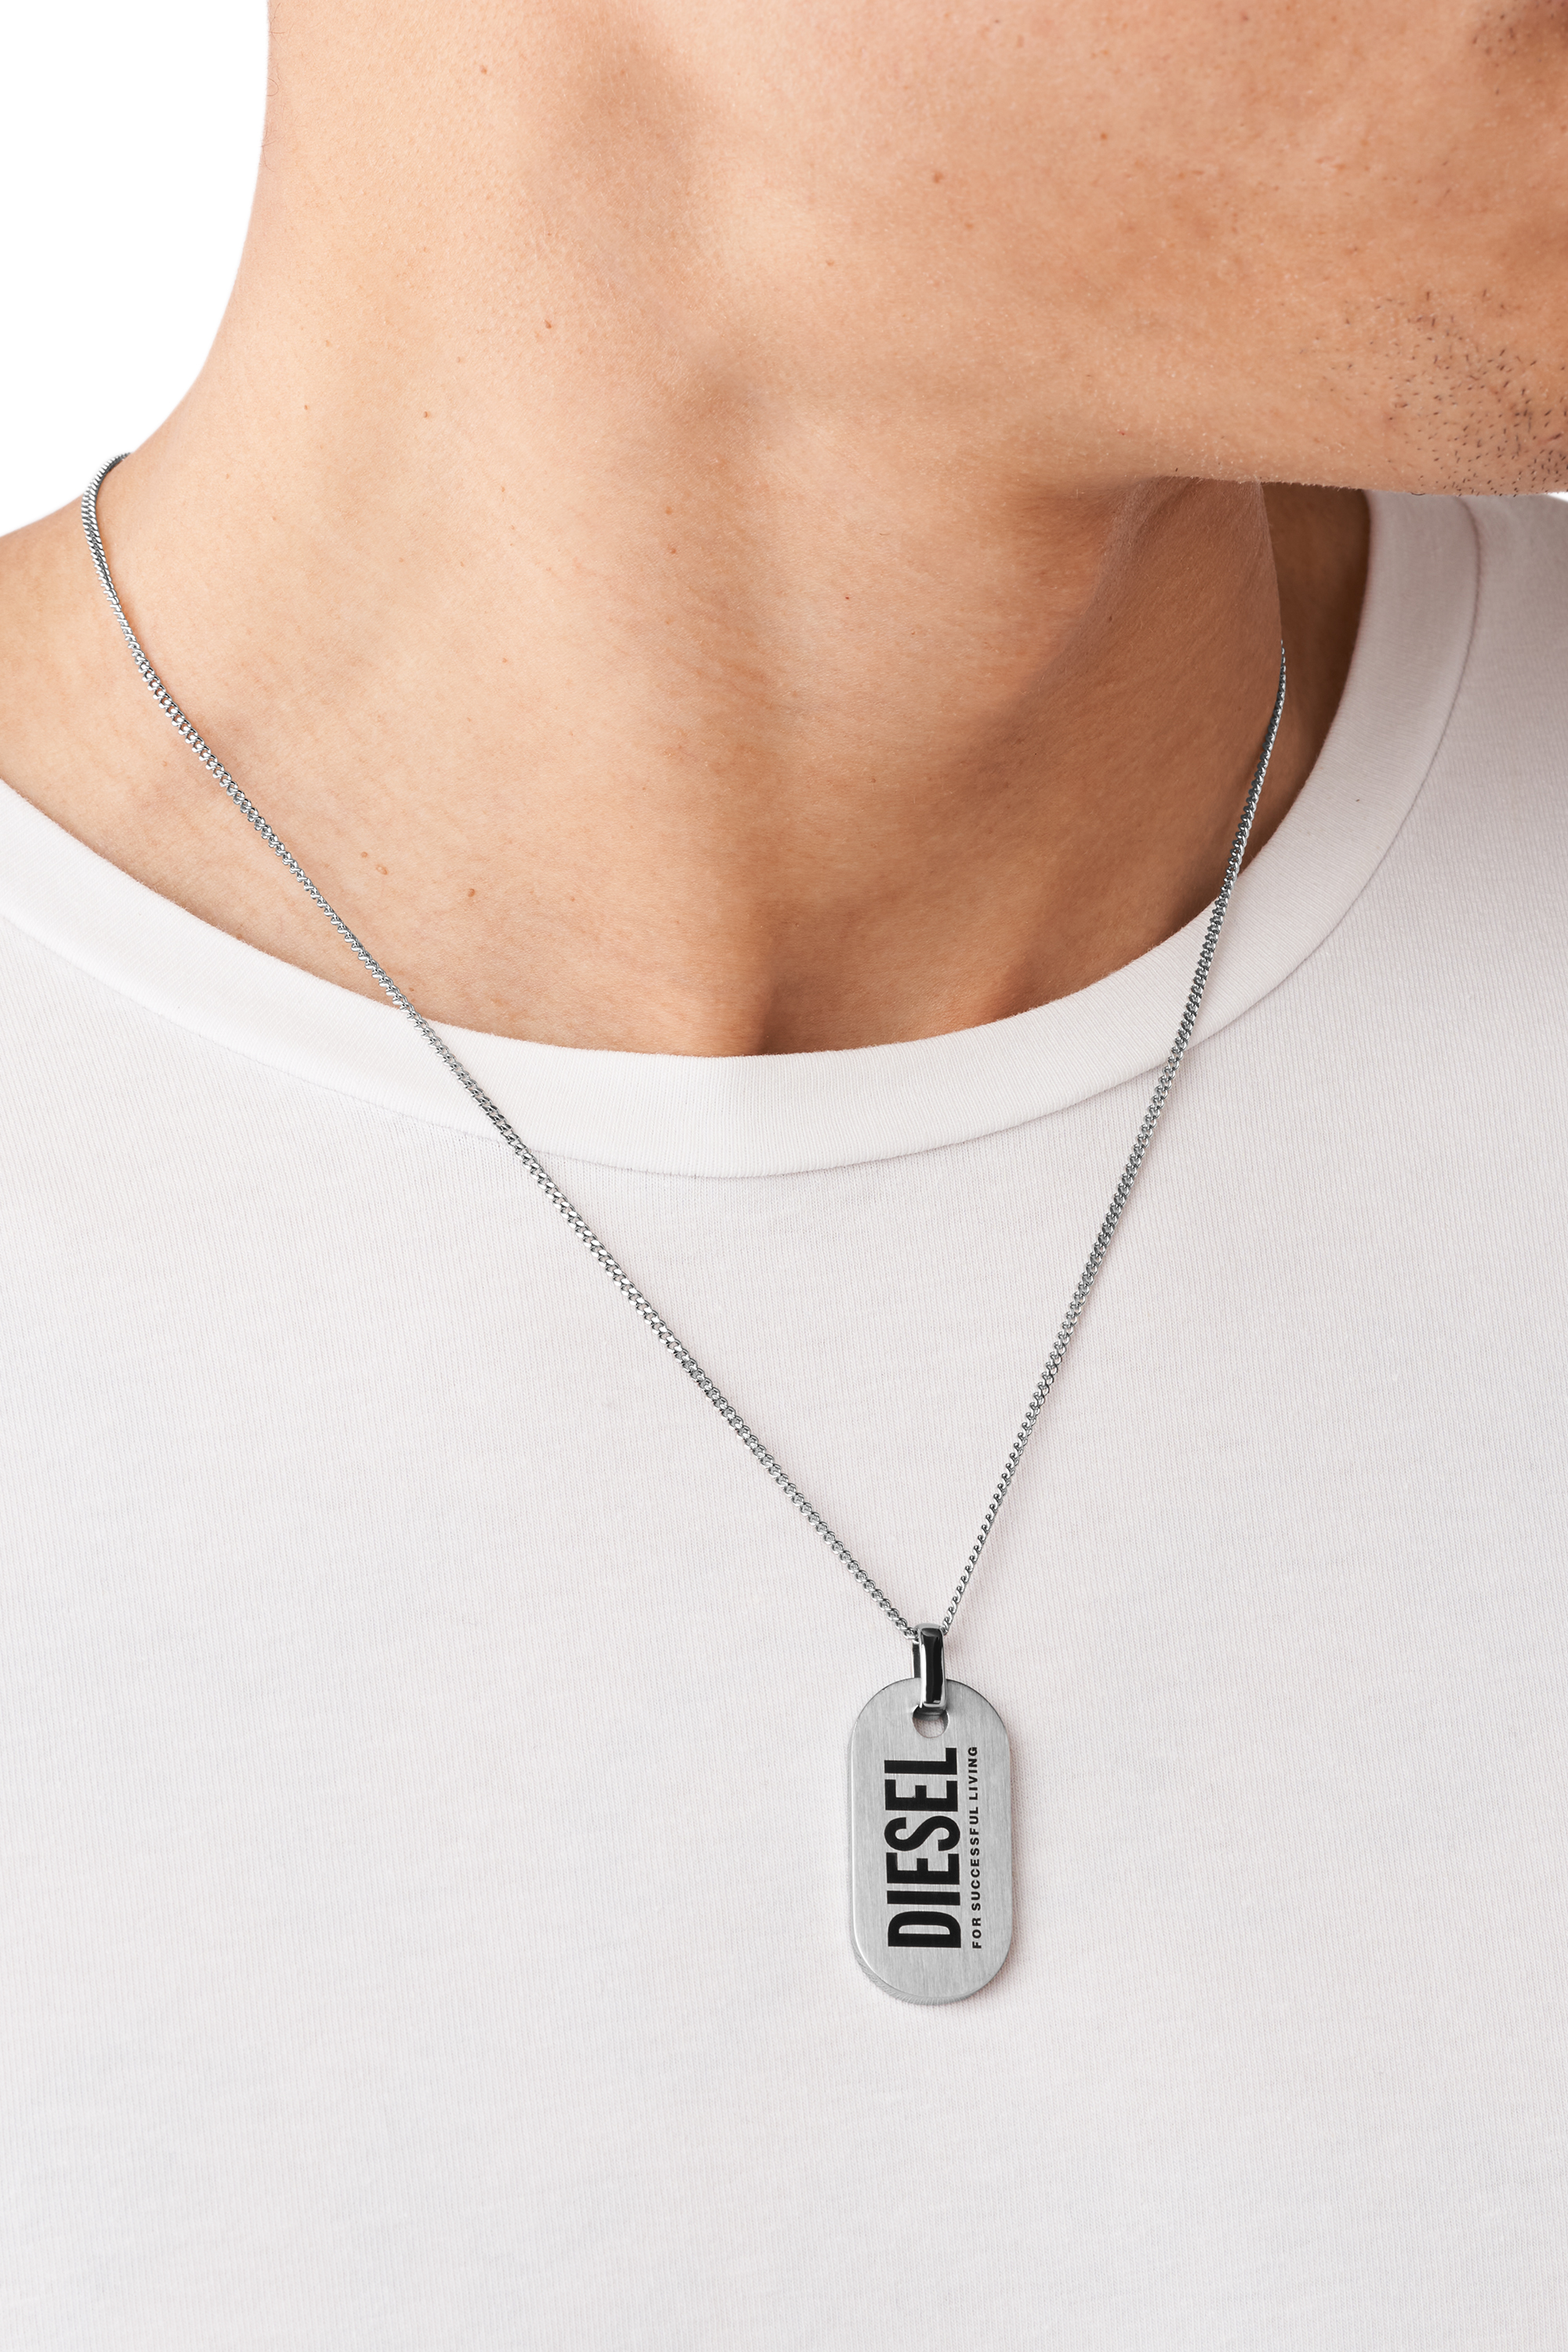 DX1348 Man: Stainless steel dog tag necklace | Diesel